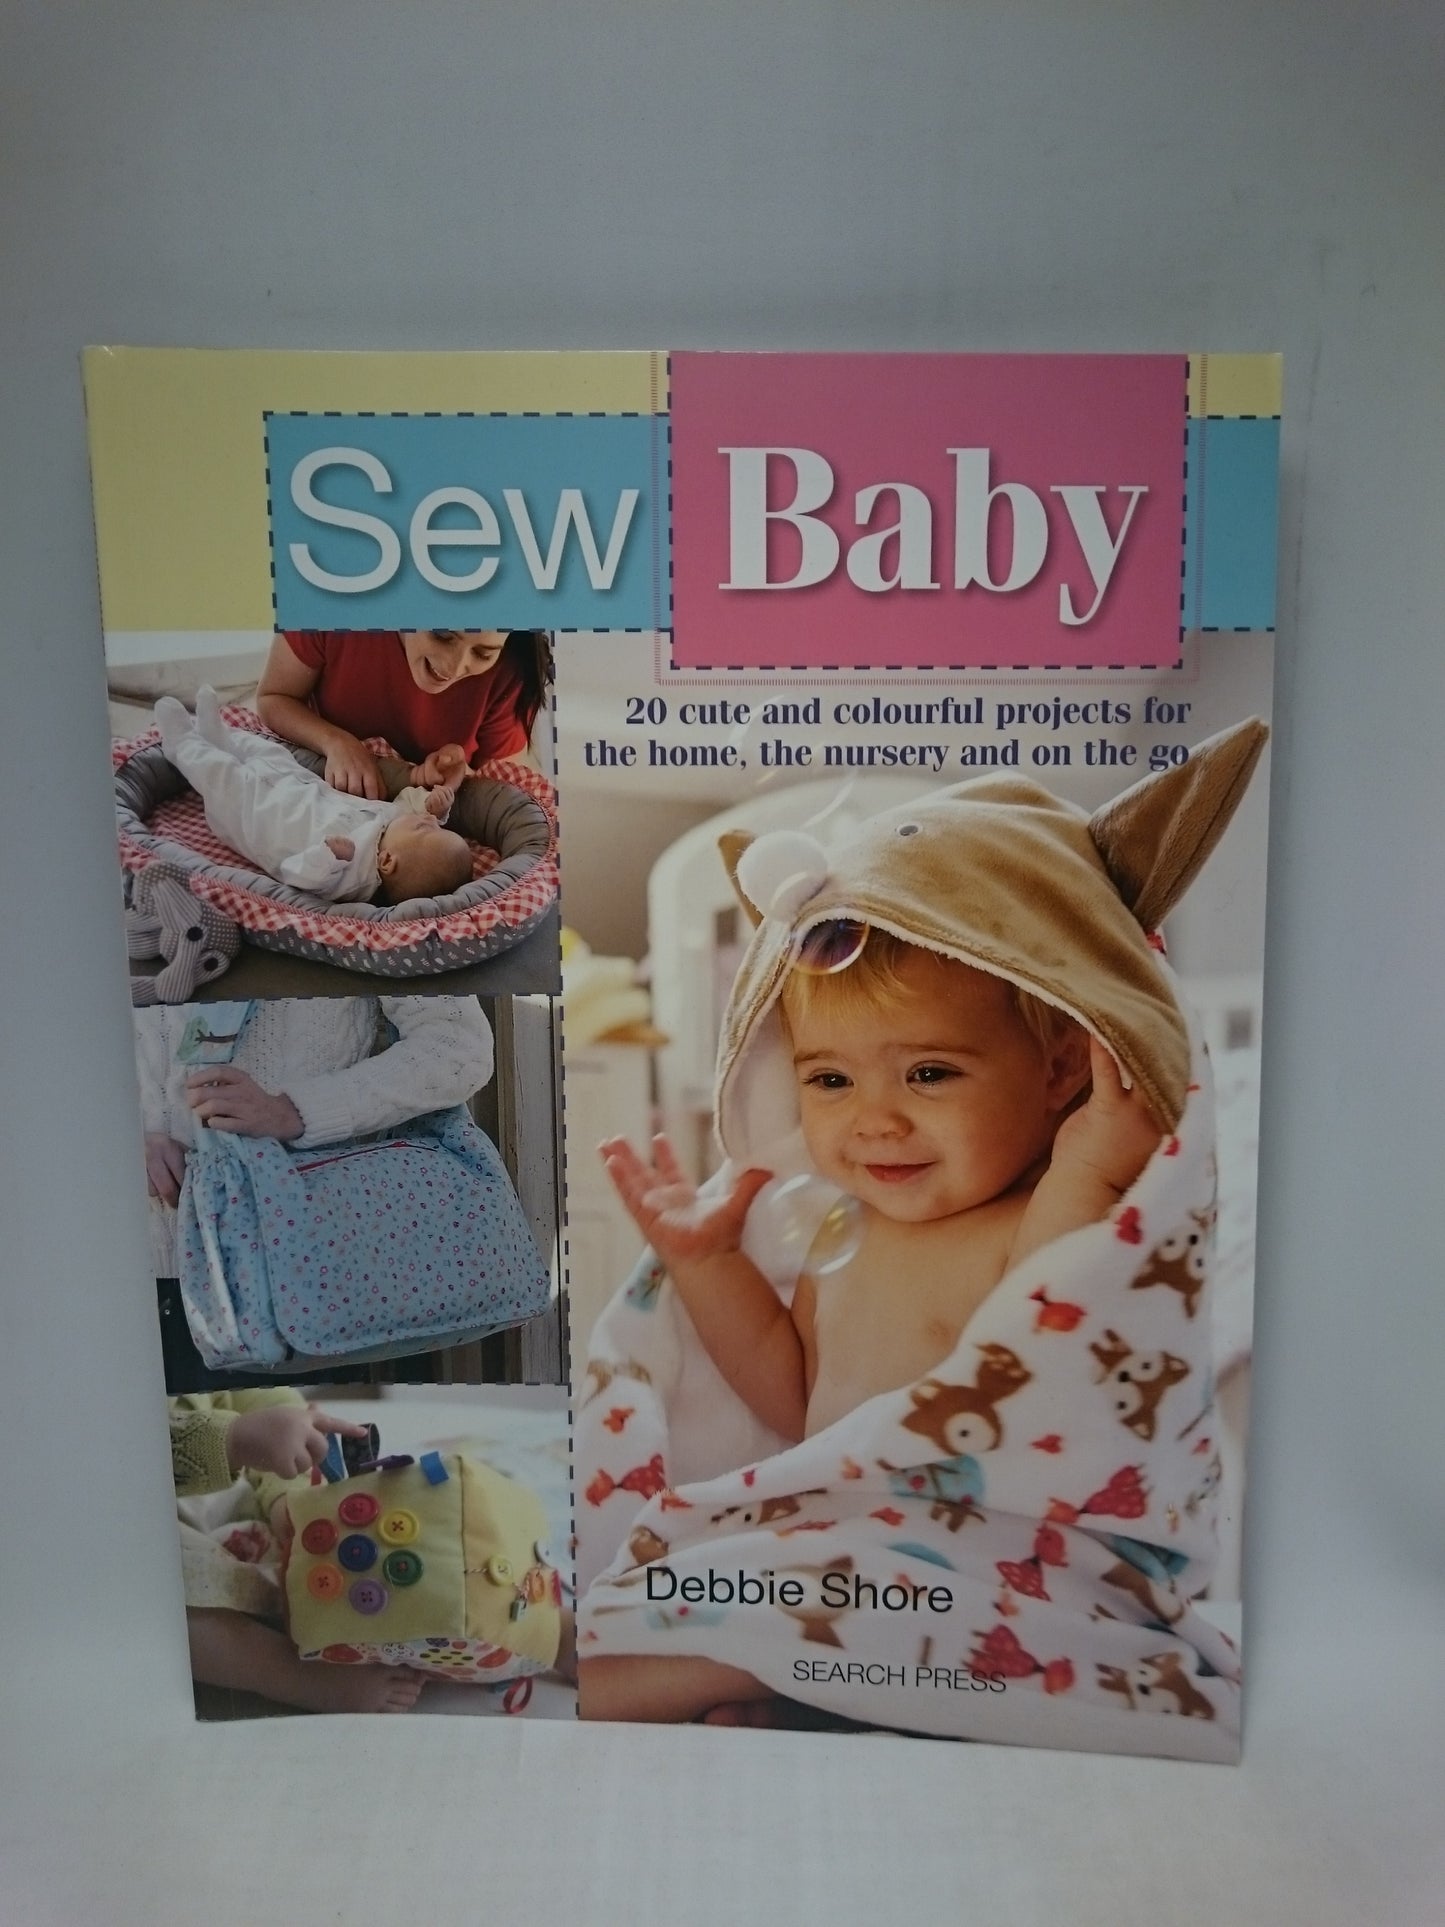 Sew Baby: 20 Cute and Colourful Projects For The Home, The Nursery And On The Go (SEW SERIES)